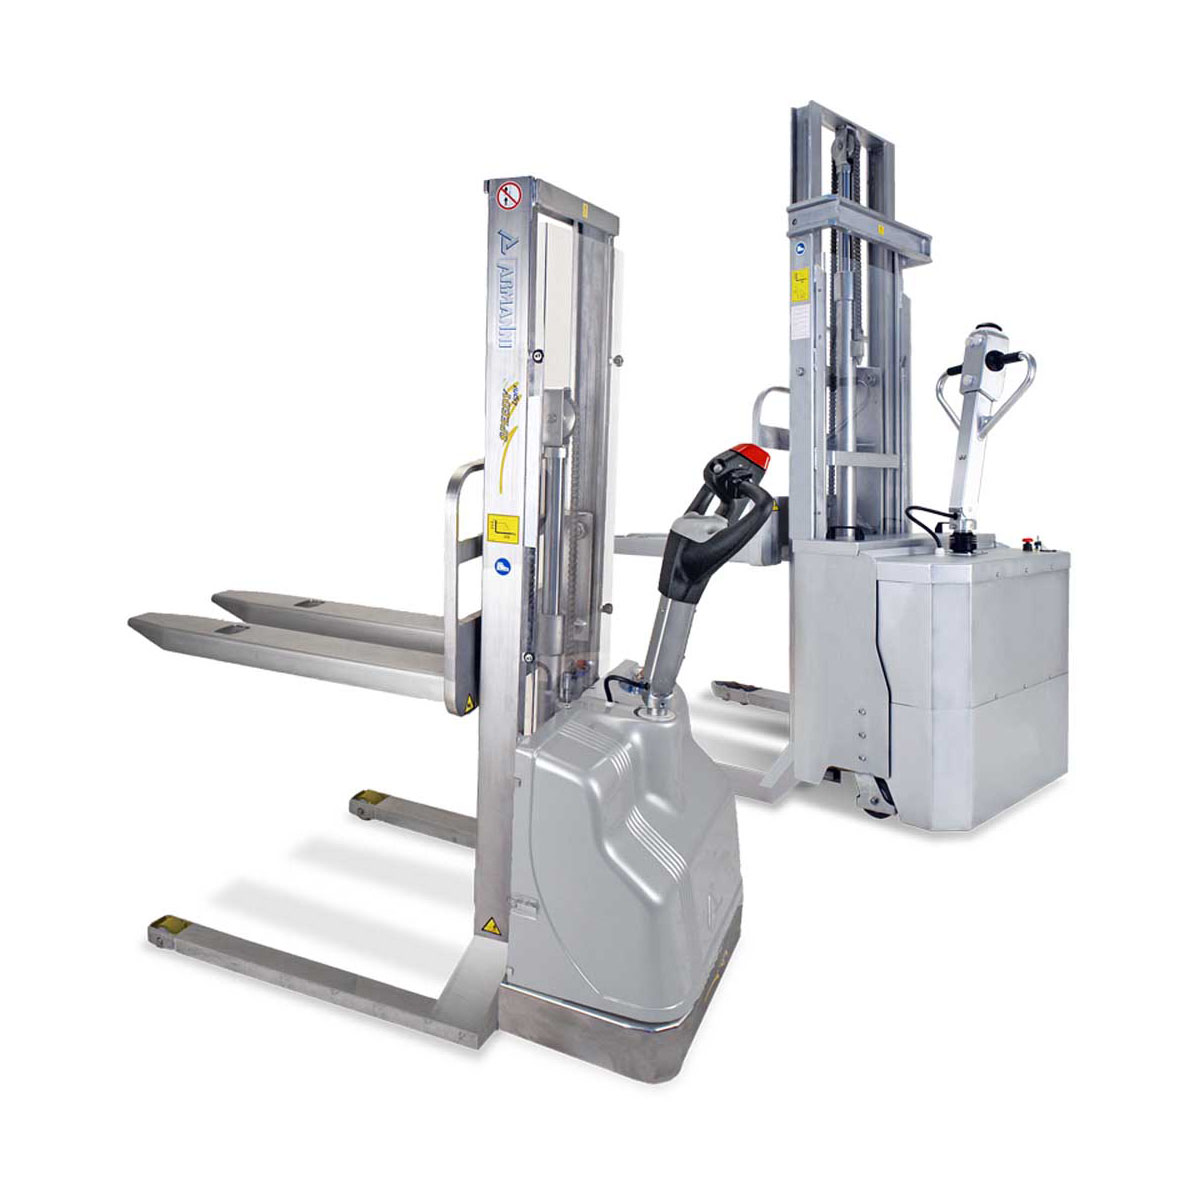 Buy Electric Straddle Stacker  in Pallet Stackers from Armanni available at Astrolift NZ